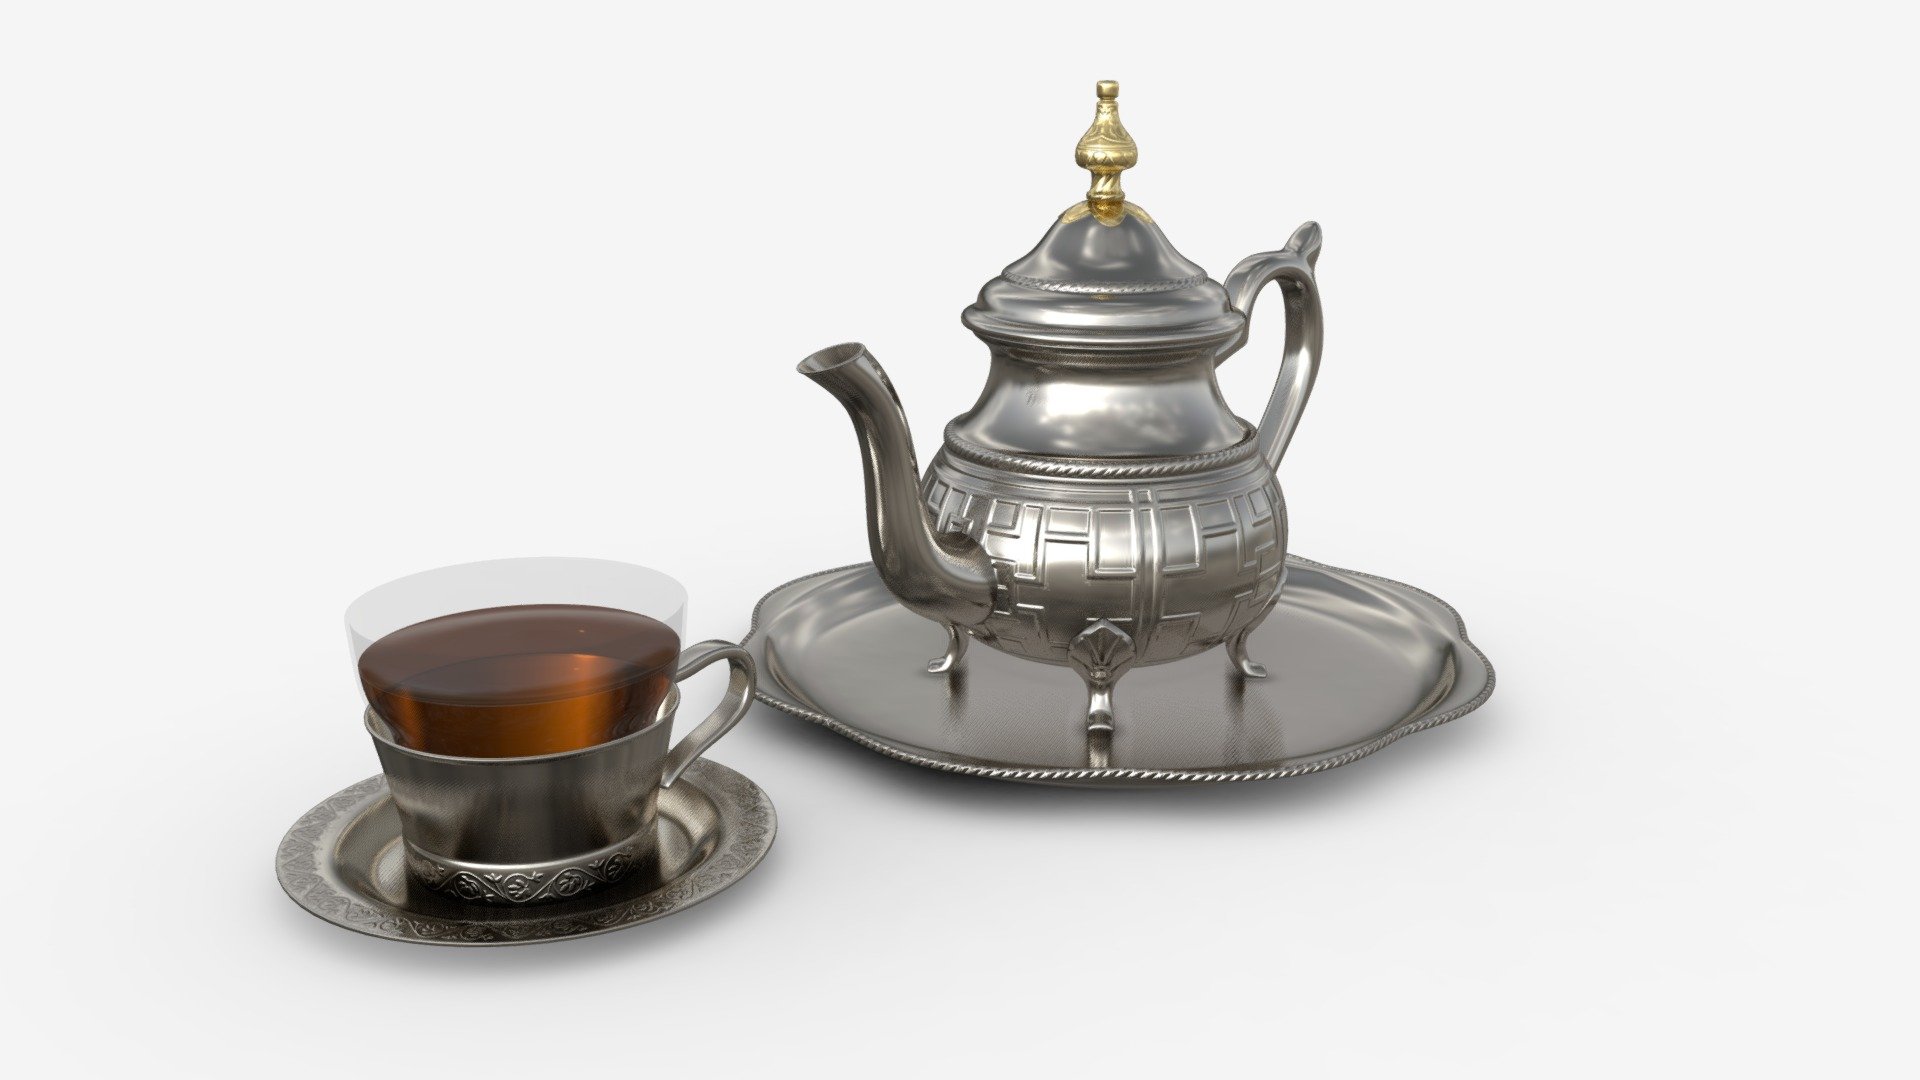 Silver Teapot and Cup with Tea - Buy Royalty Free 3D model by HQ3DMOD (@AivisAstics) 3d model